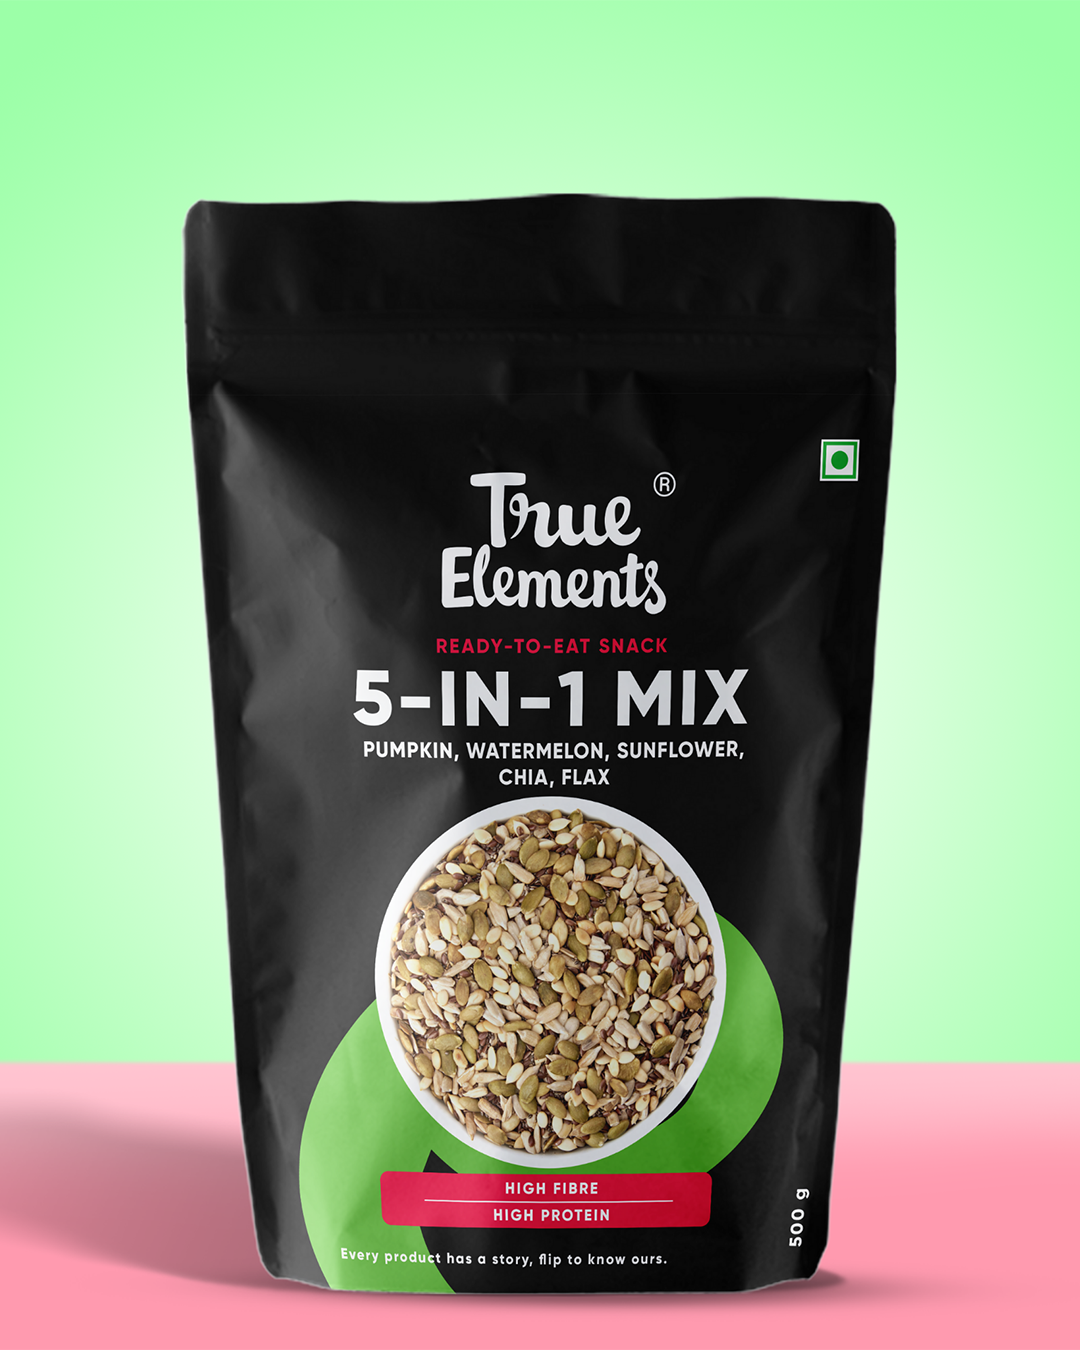 5 in 1 mix with pumpkin, watermelon, sunflower, chia and flax in 500g pouch.